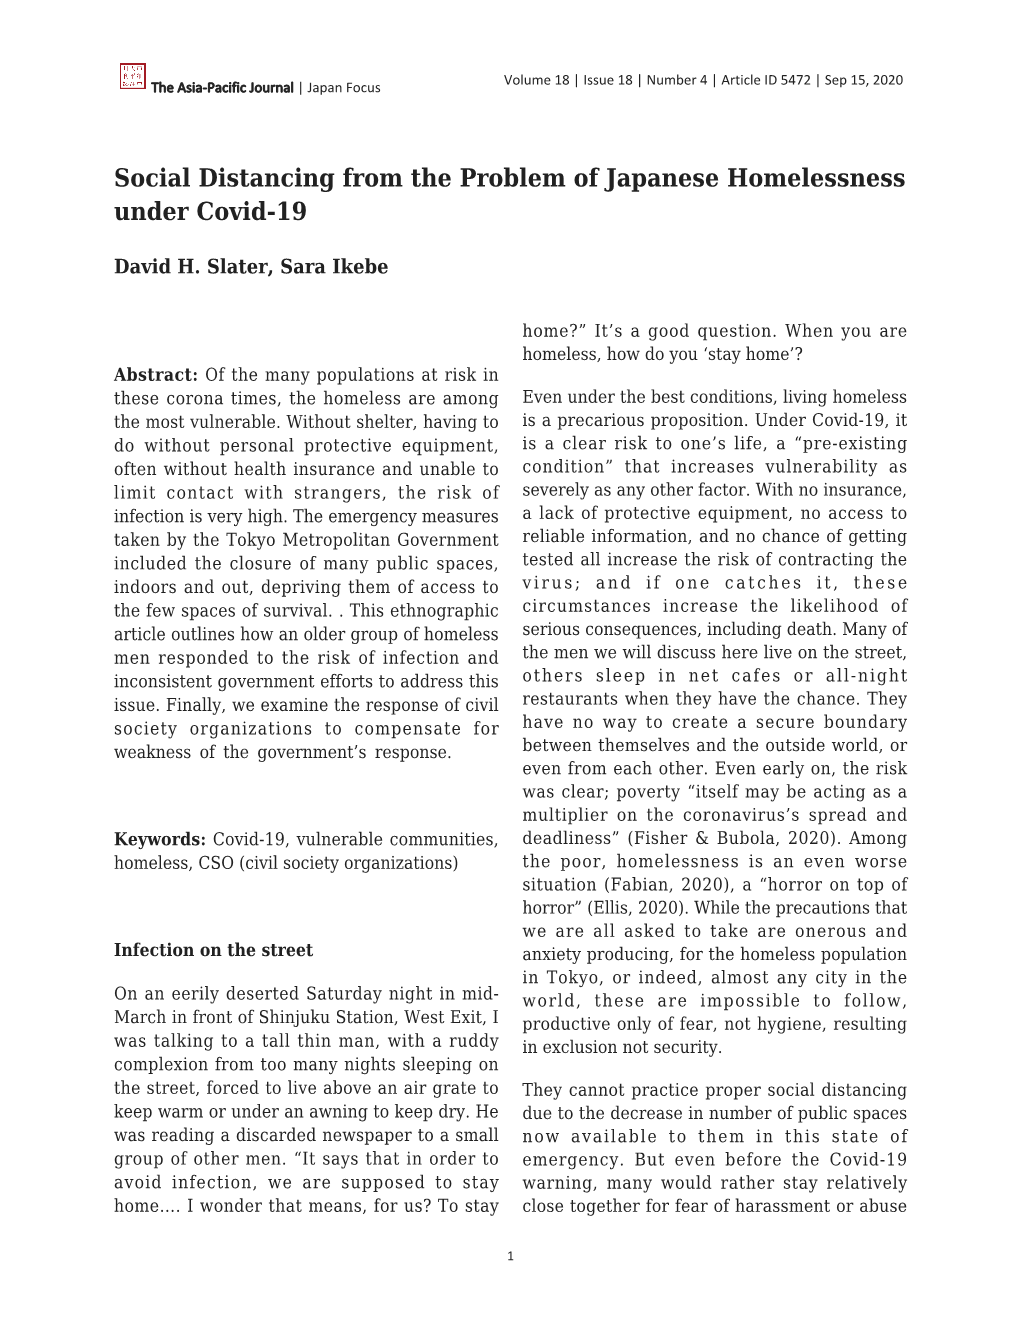 Social Distancing from the Problem of Japanese Homelessness Under Covid-19